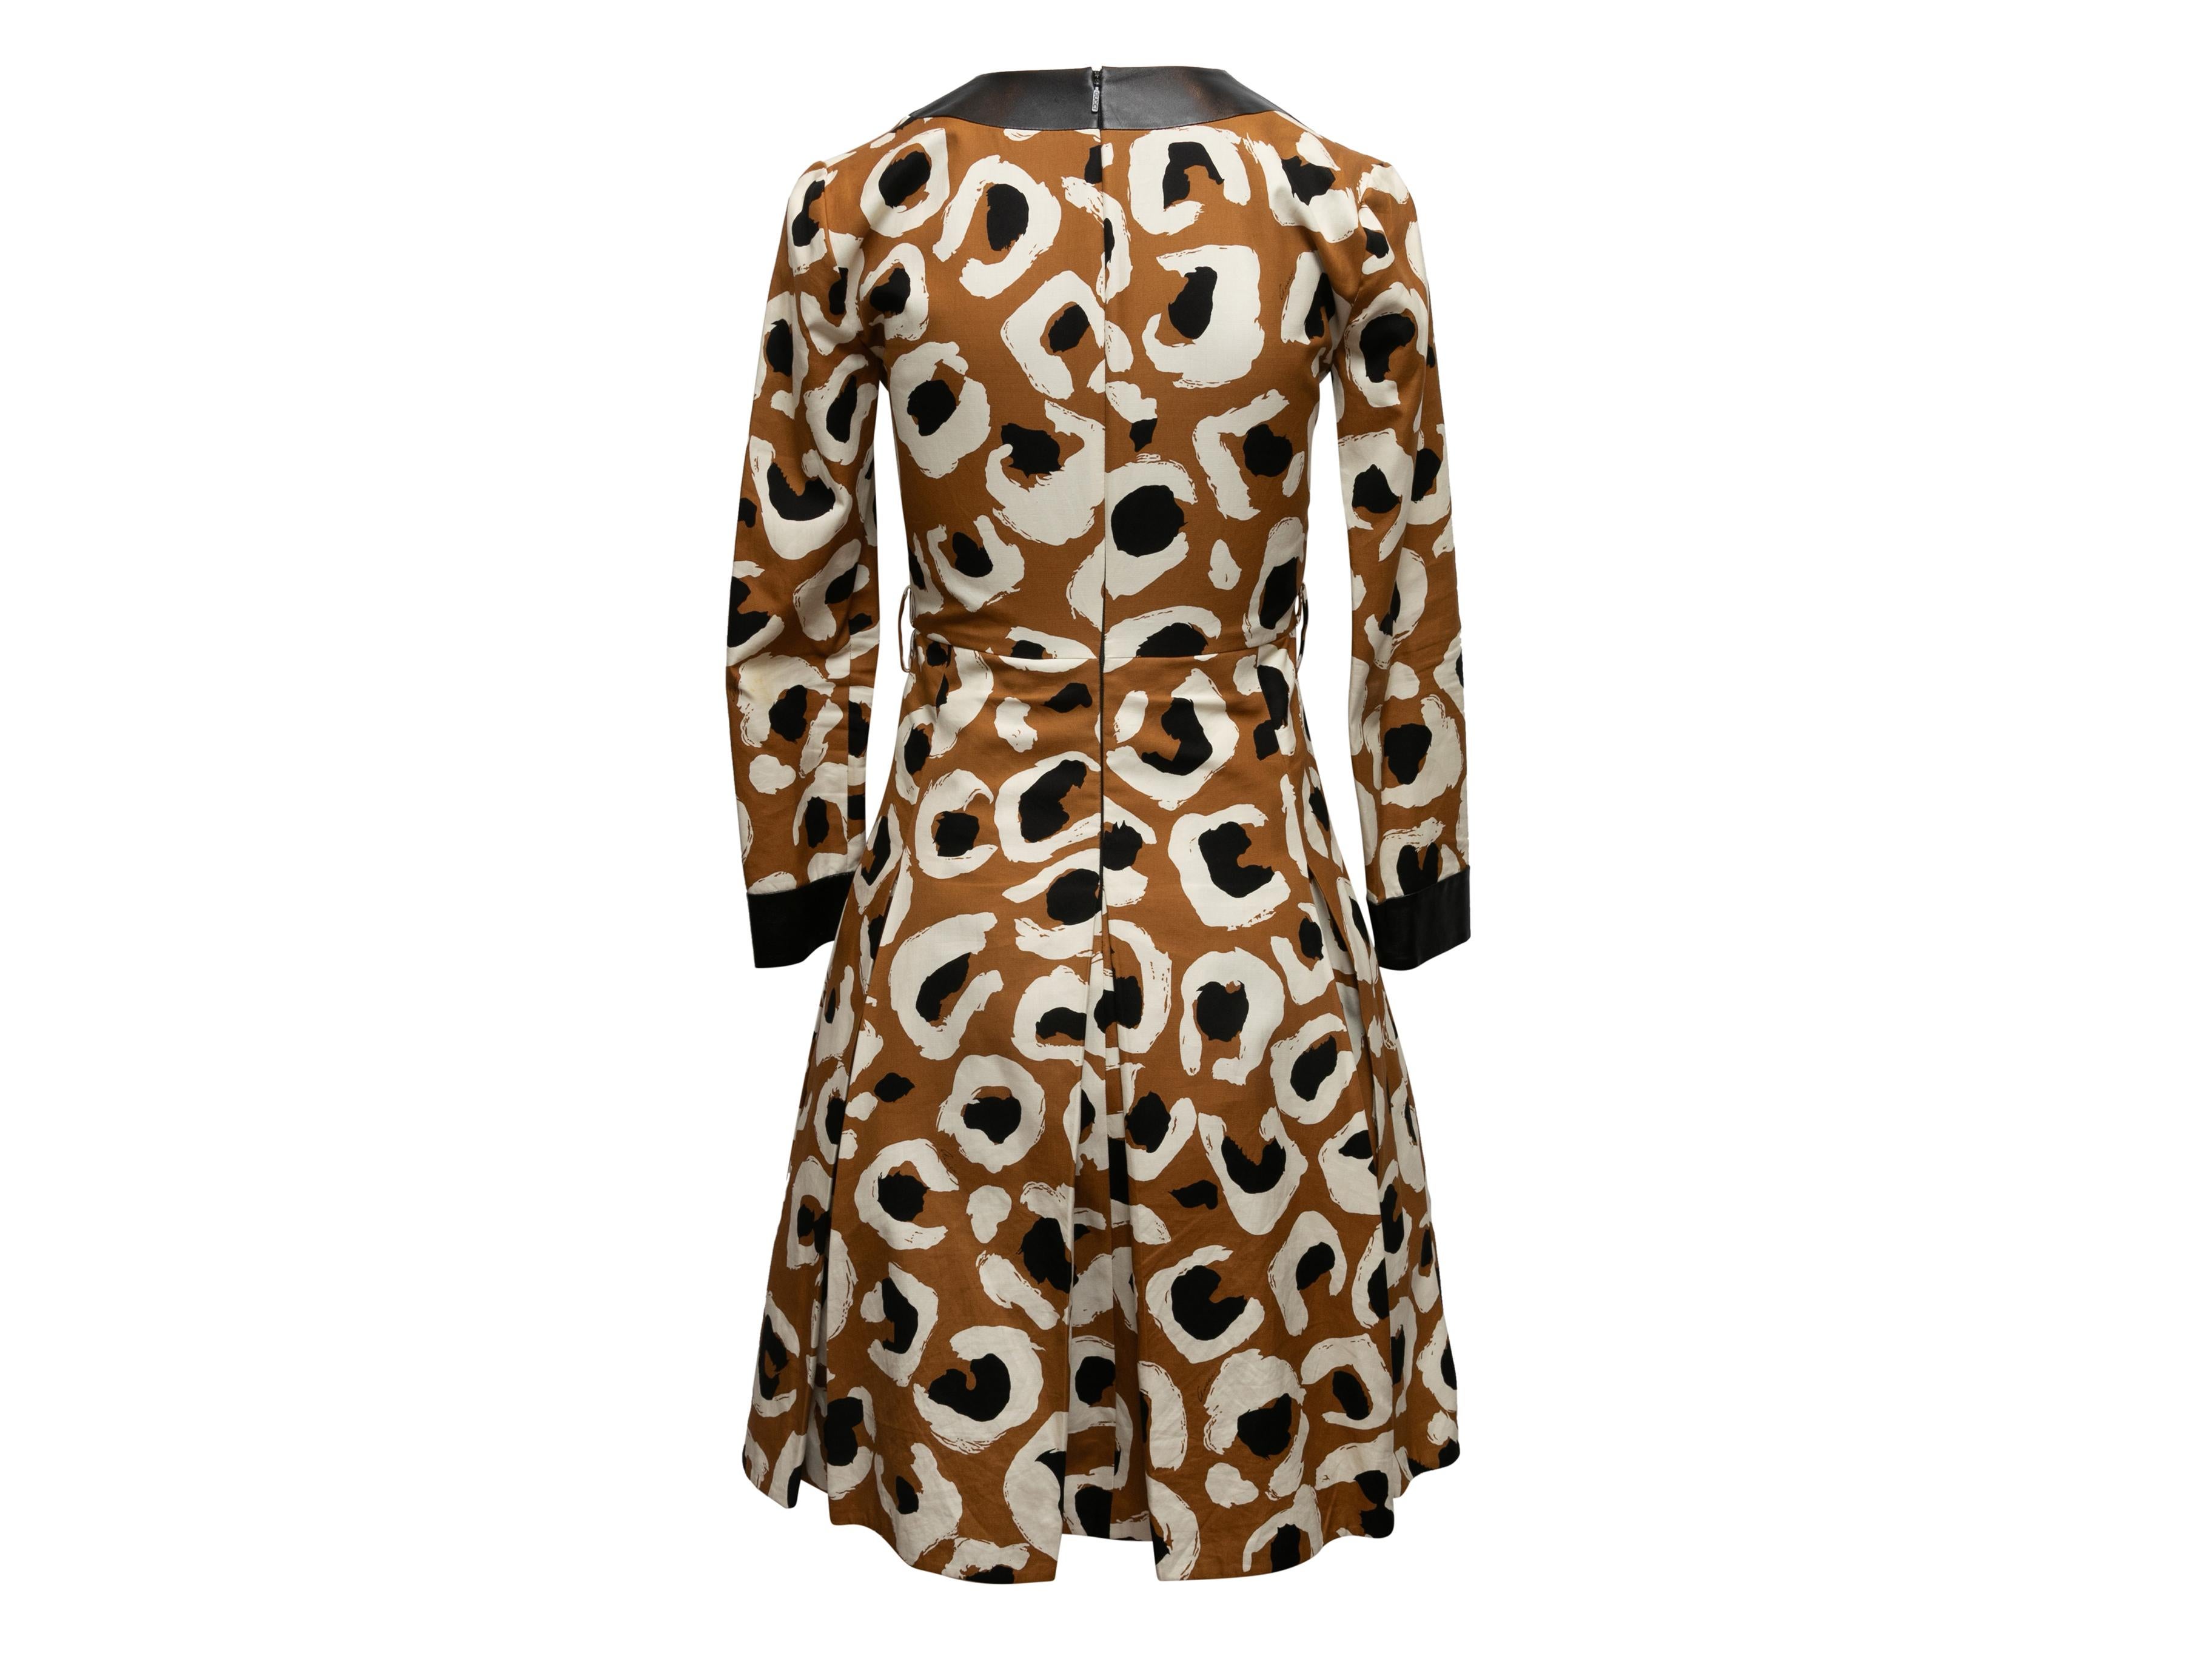 Brown, cream, and black abstract print long sleeve dress by Gucci. Leather trim throughout. V-neck. Pleated skirt. Zip closure at center back. Designer size 38. 30